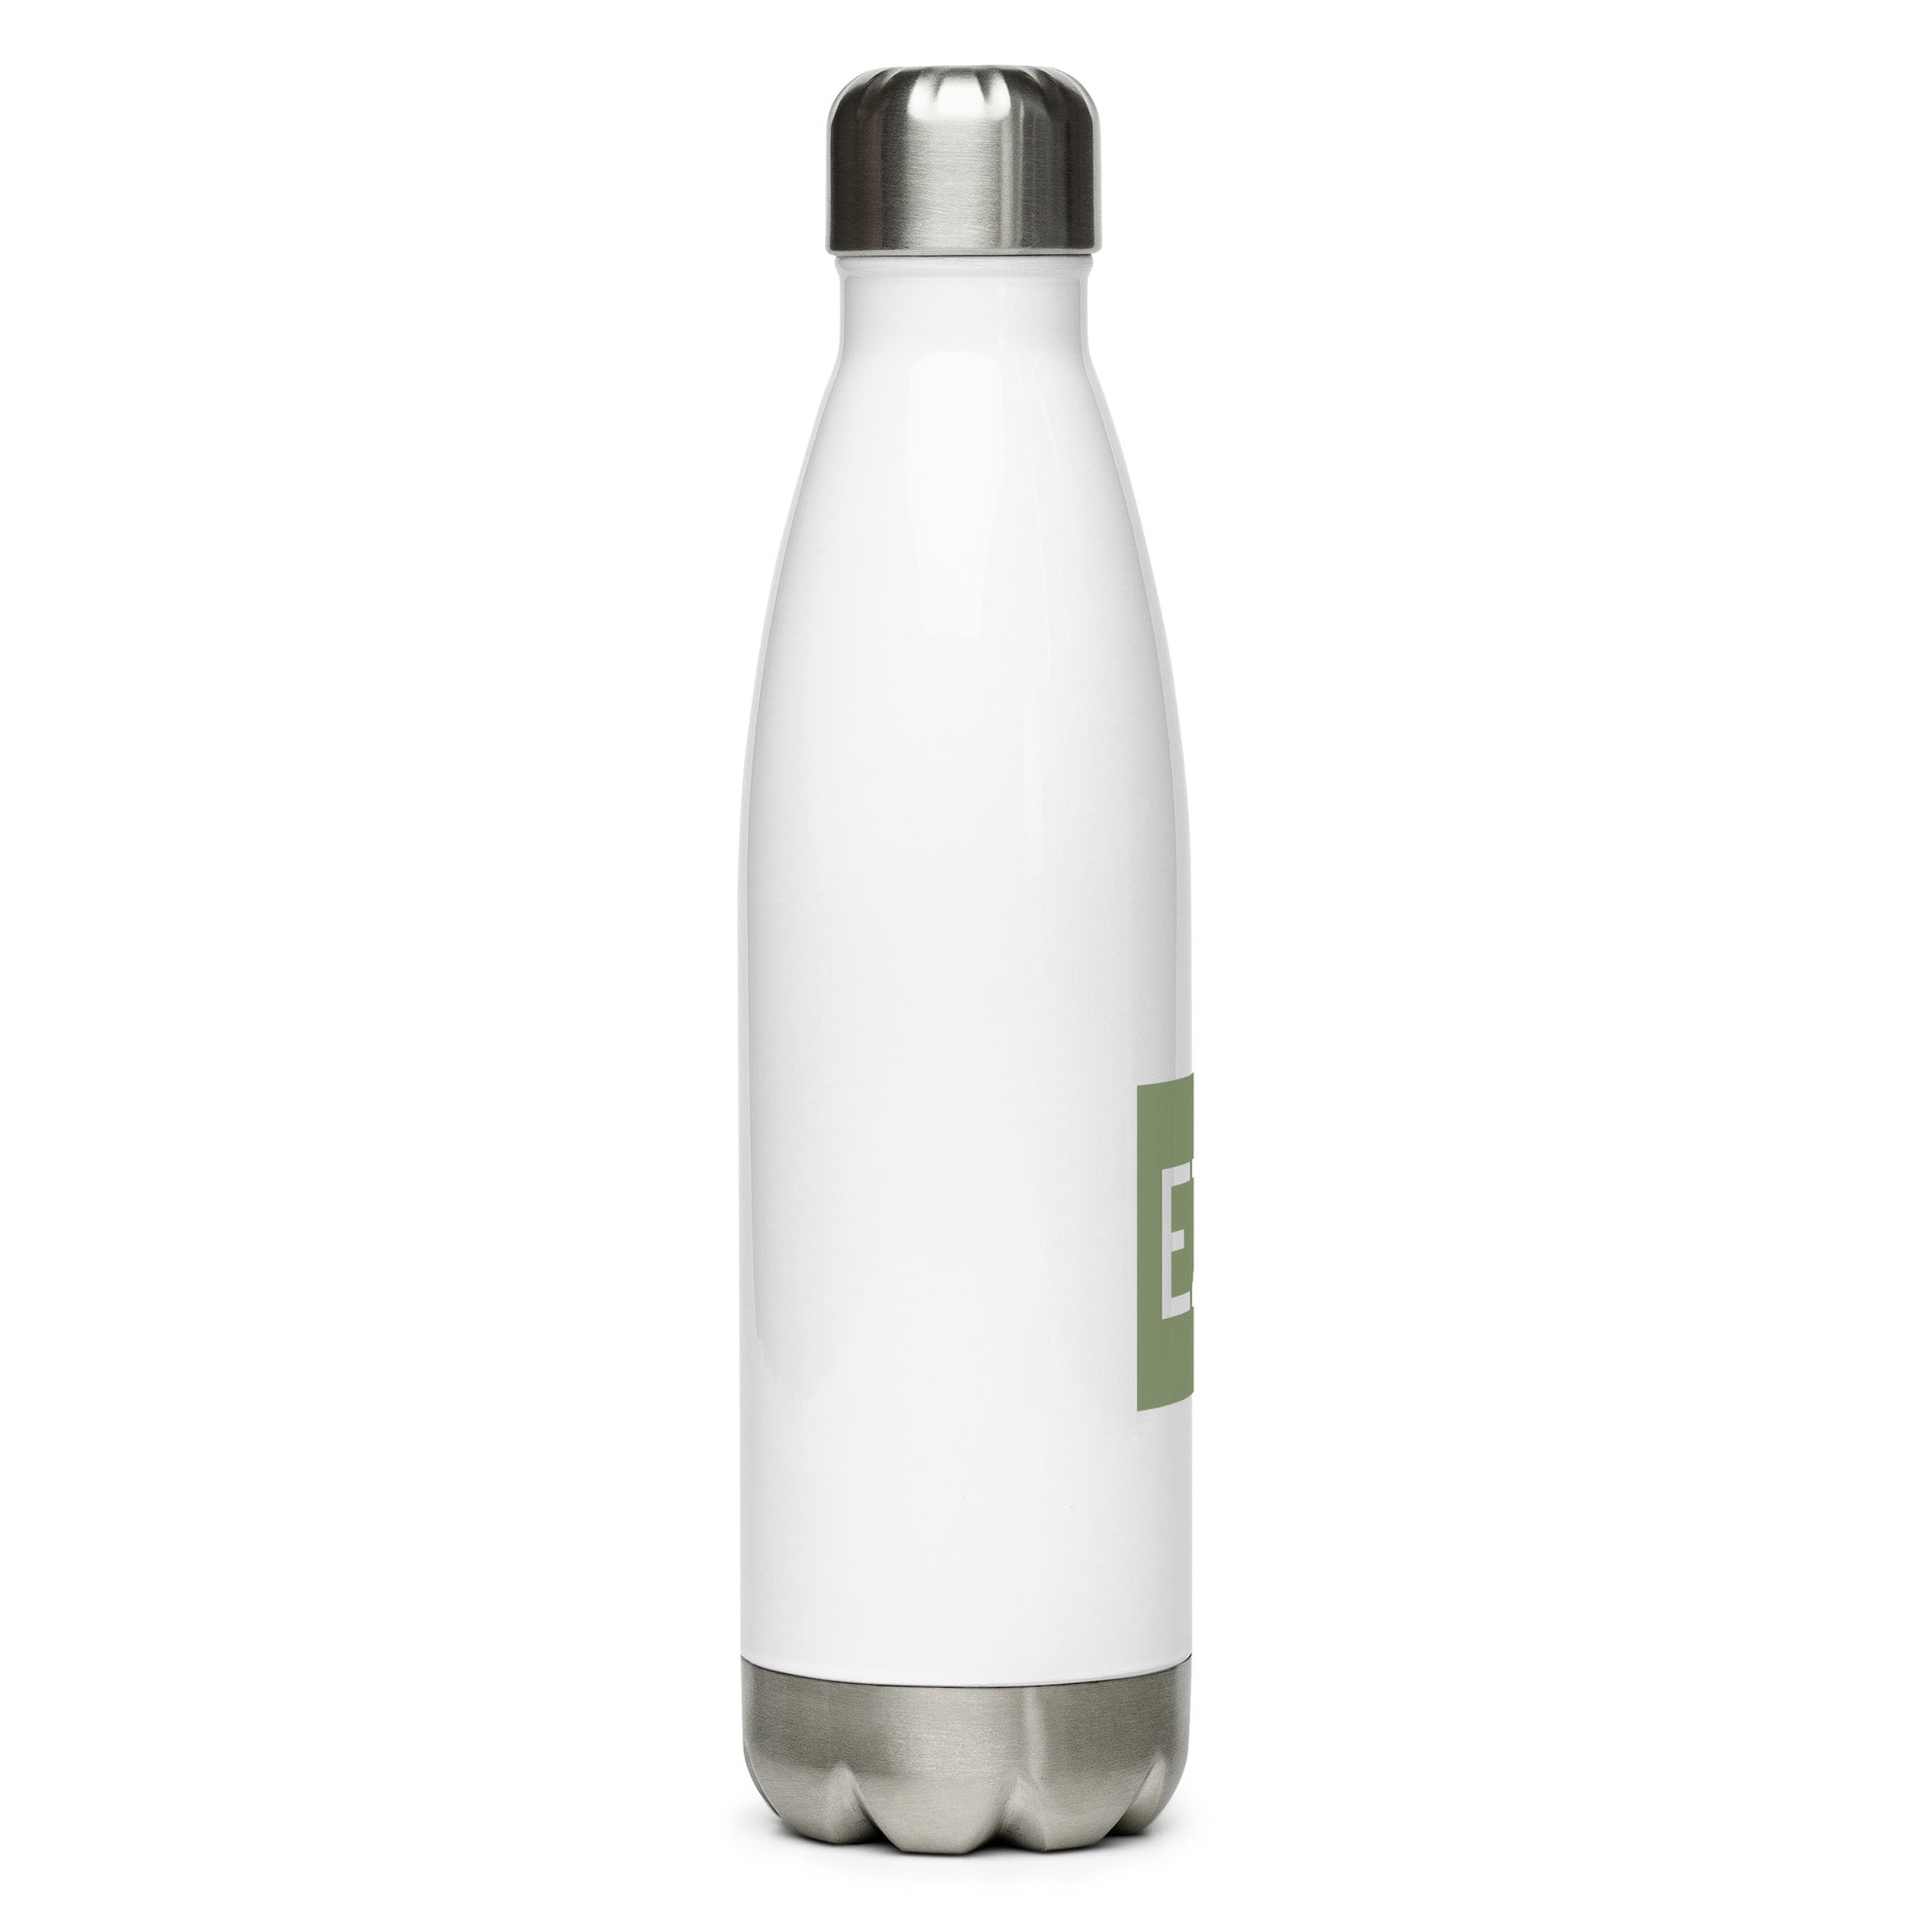 Aviation Gift Water Bottle - Camo Green • EZE Buenos Aires • YHM Designs - Image 07